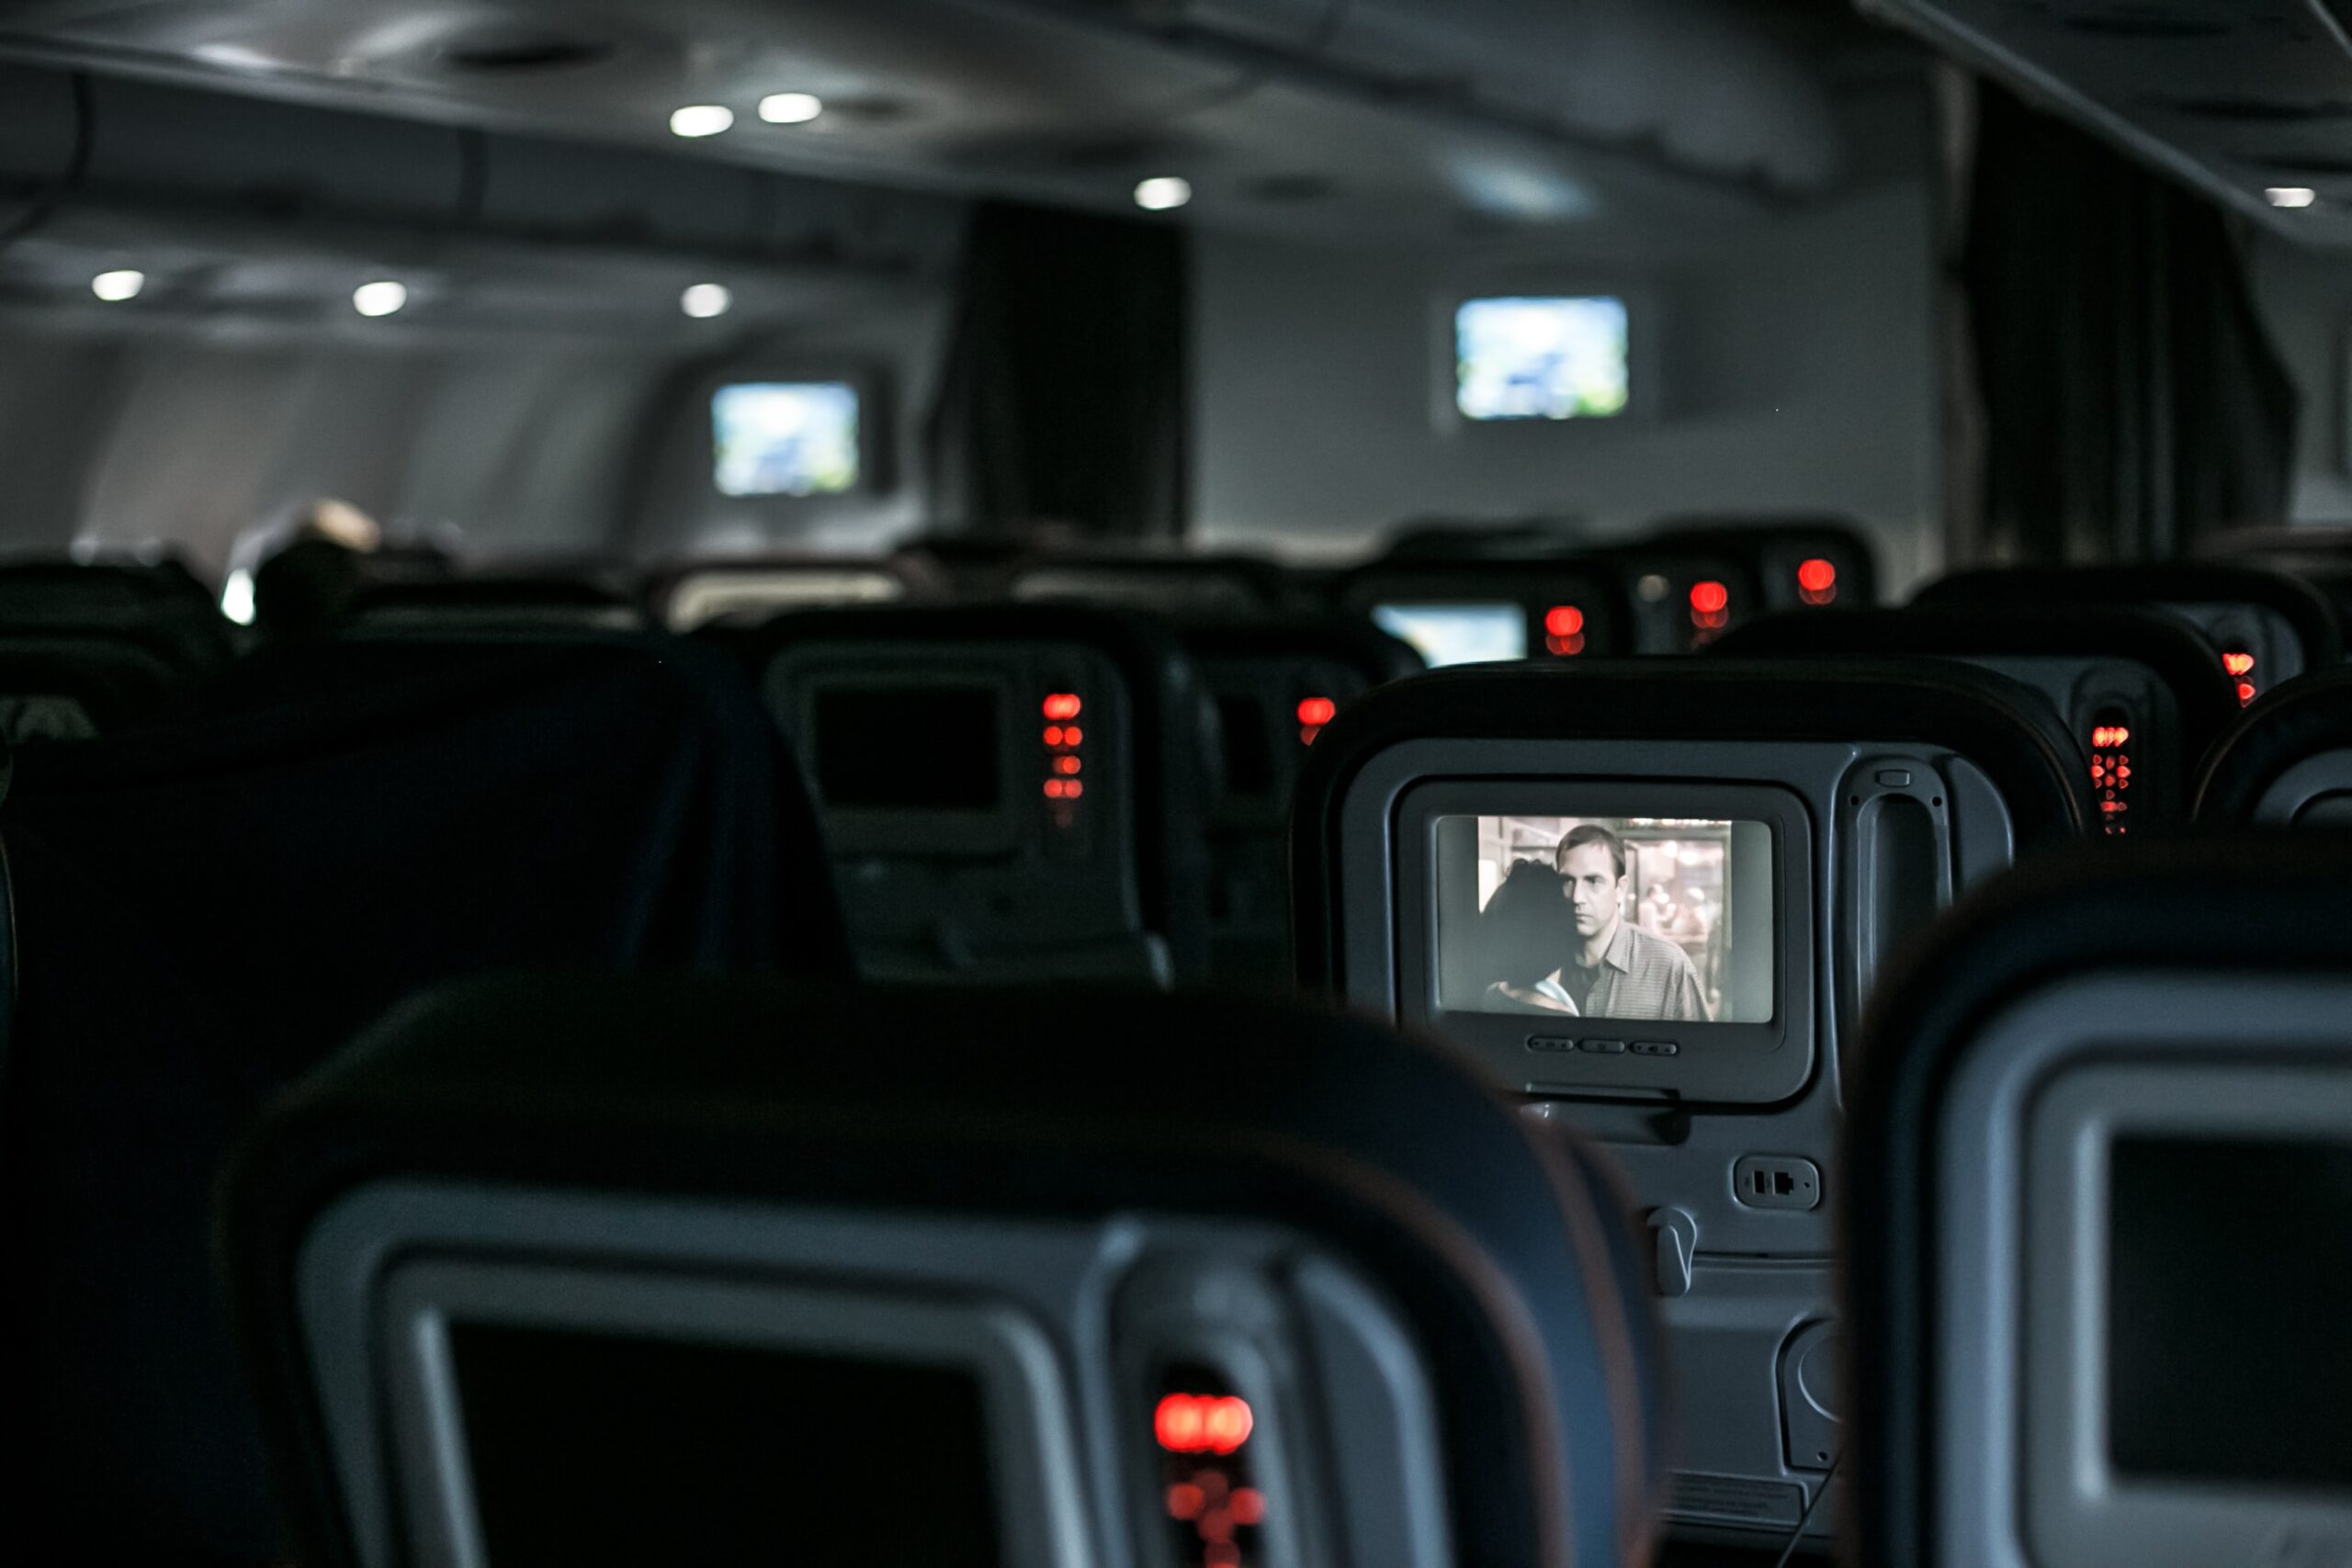 Check out the top rated airlines for safety, which offer the best precautions and quality. 
pictured: the interior of an airplane with passengers watching in-flight entertainment 